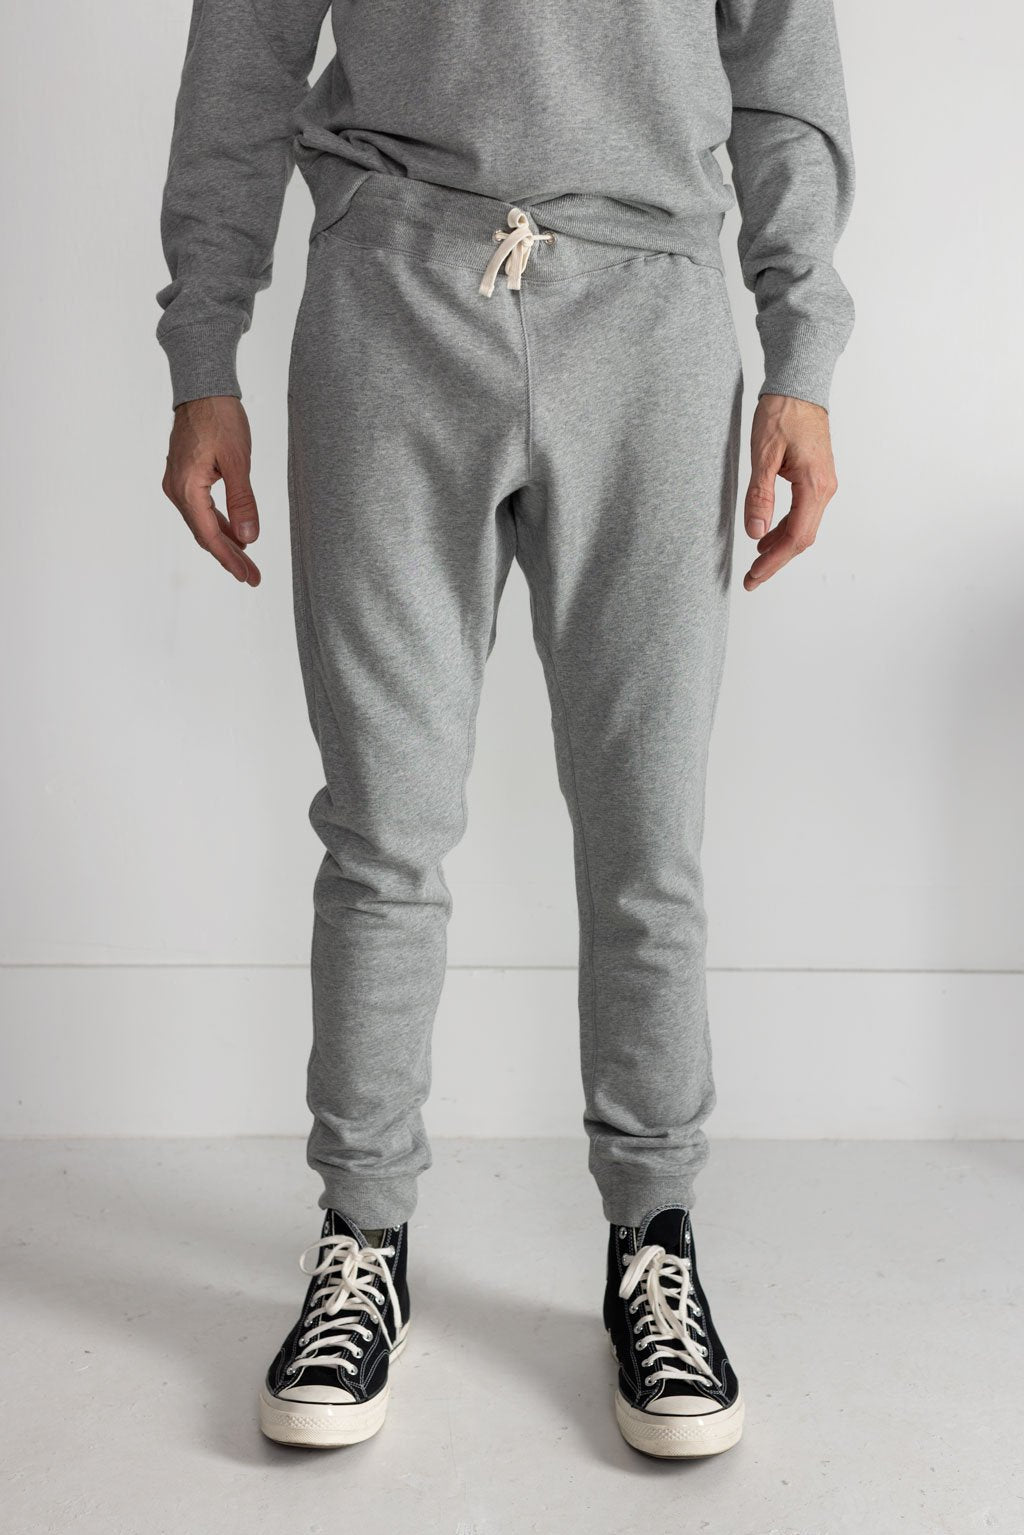 NS2167-3 250g French Terry Sweatpants in Melange Grey 02